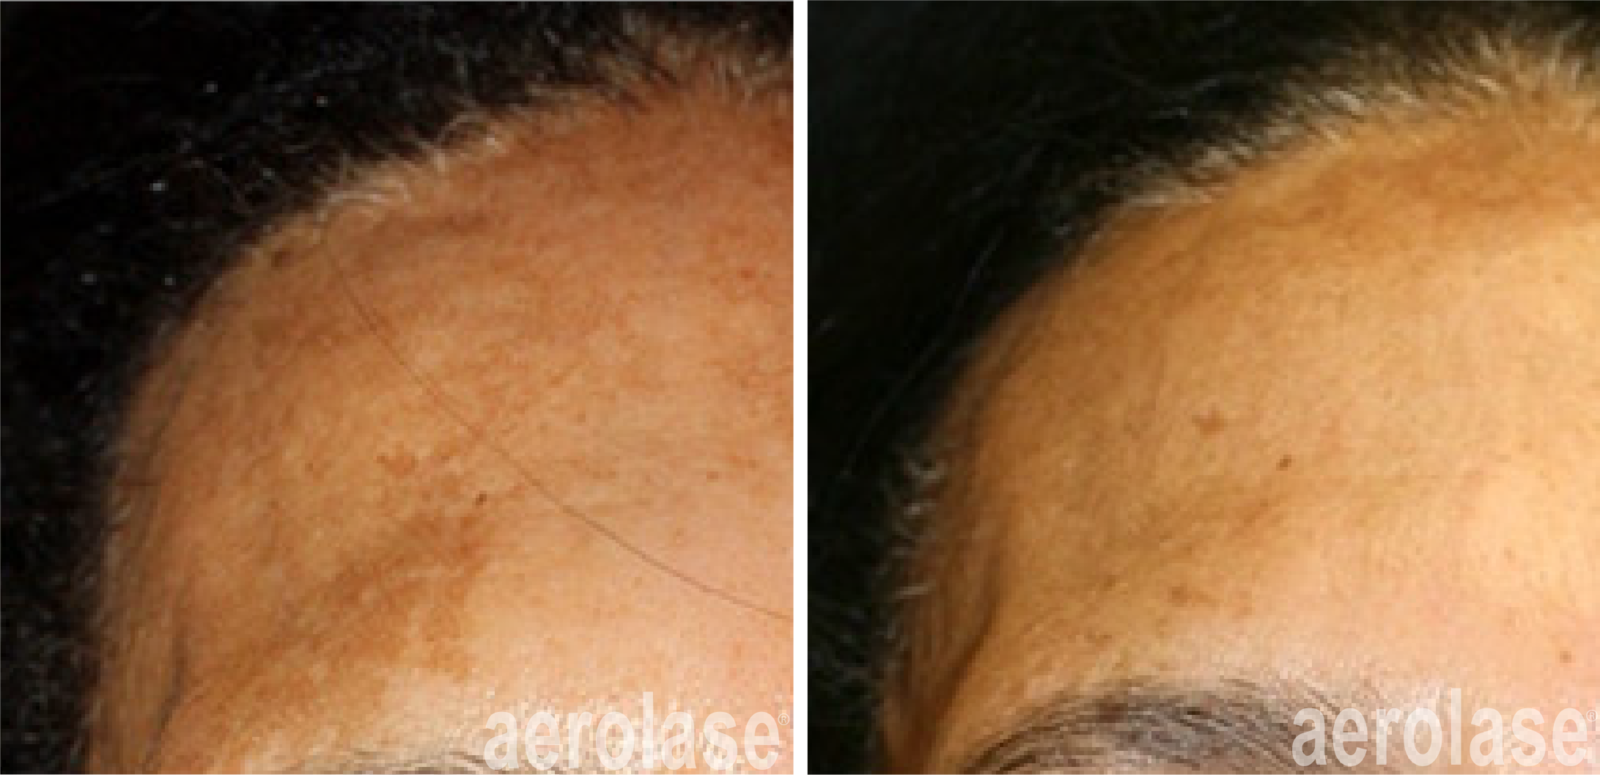 before and after laser treatment on facial skin